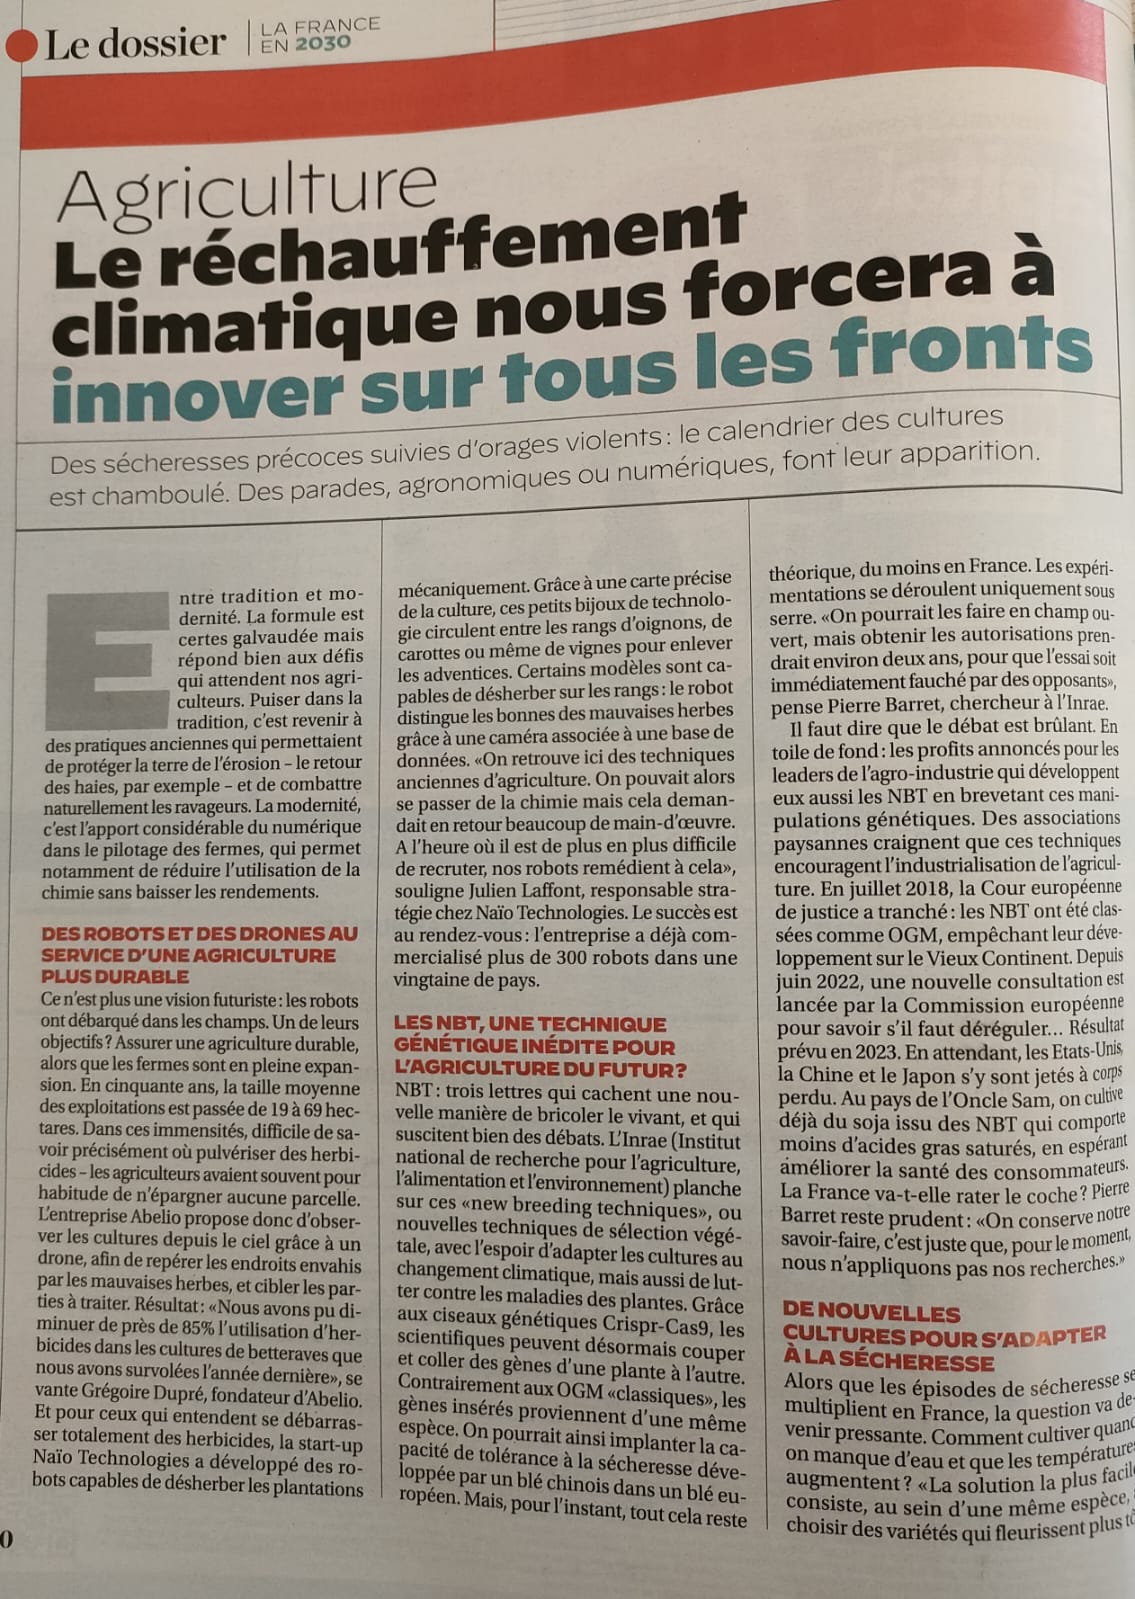 Article Capital France 2030